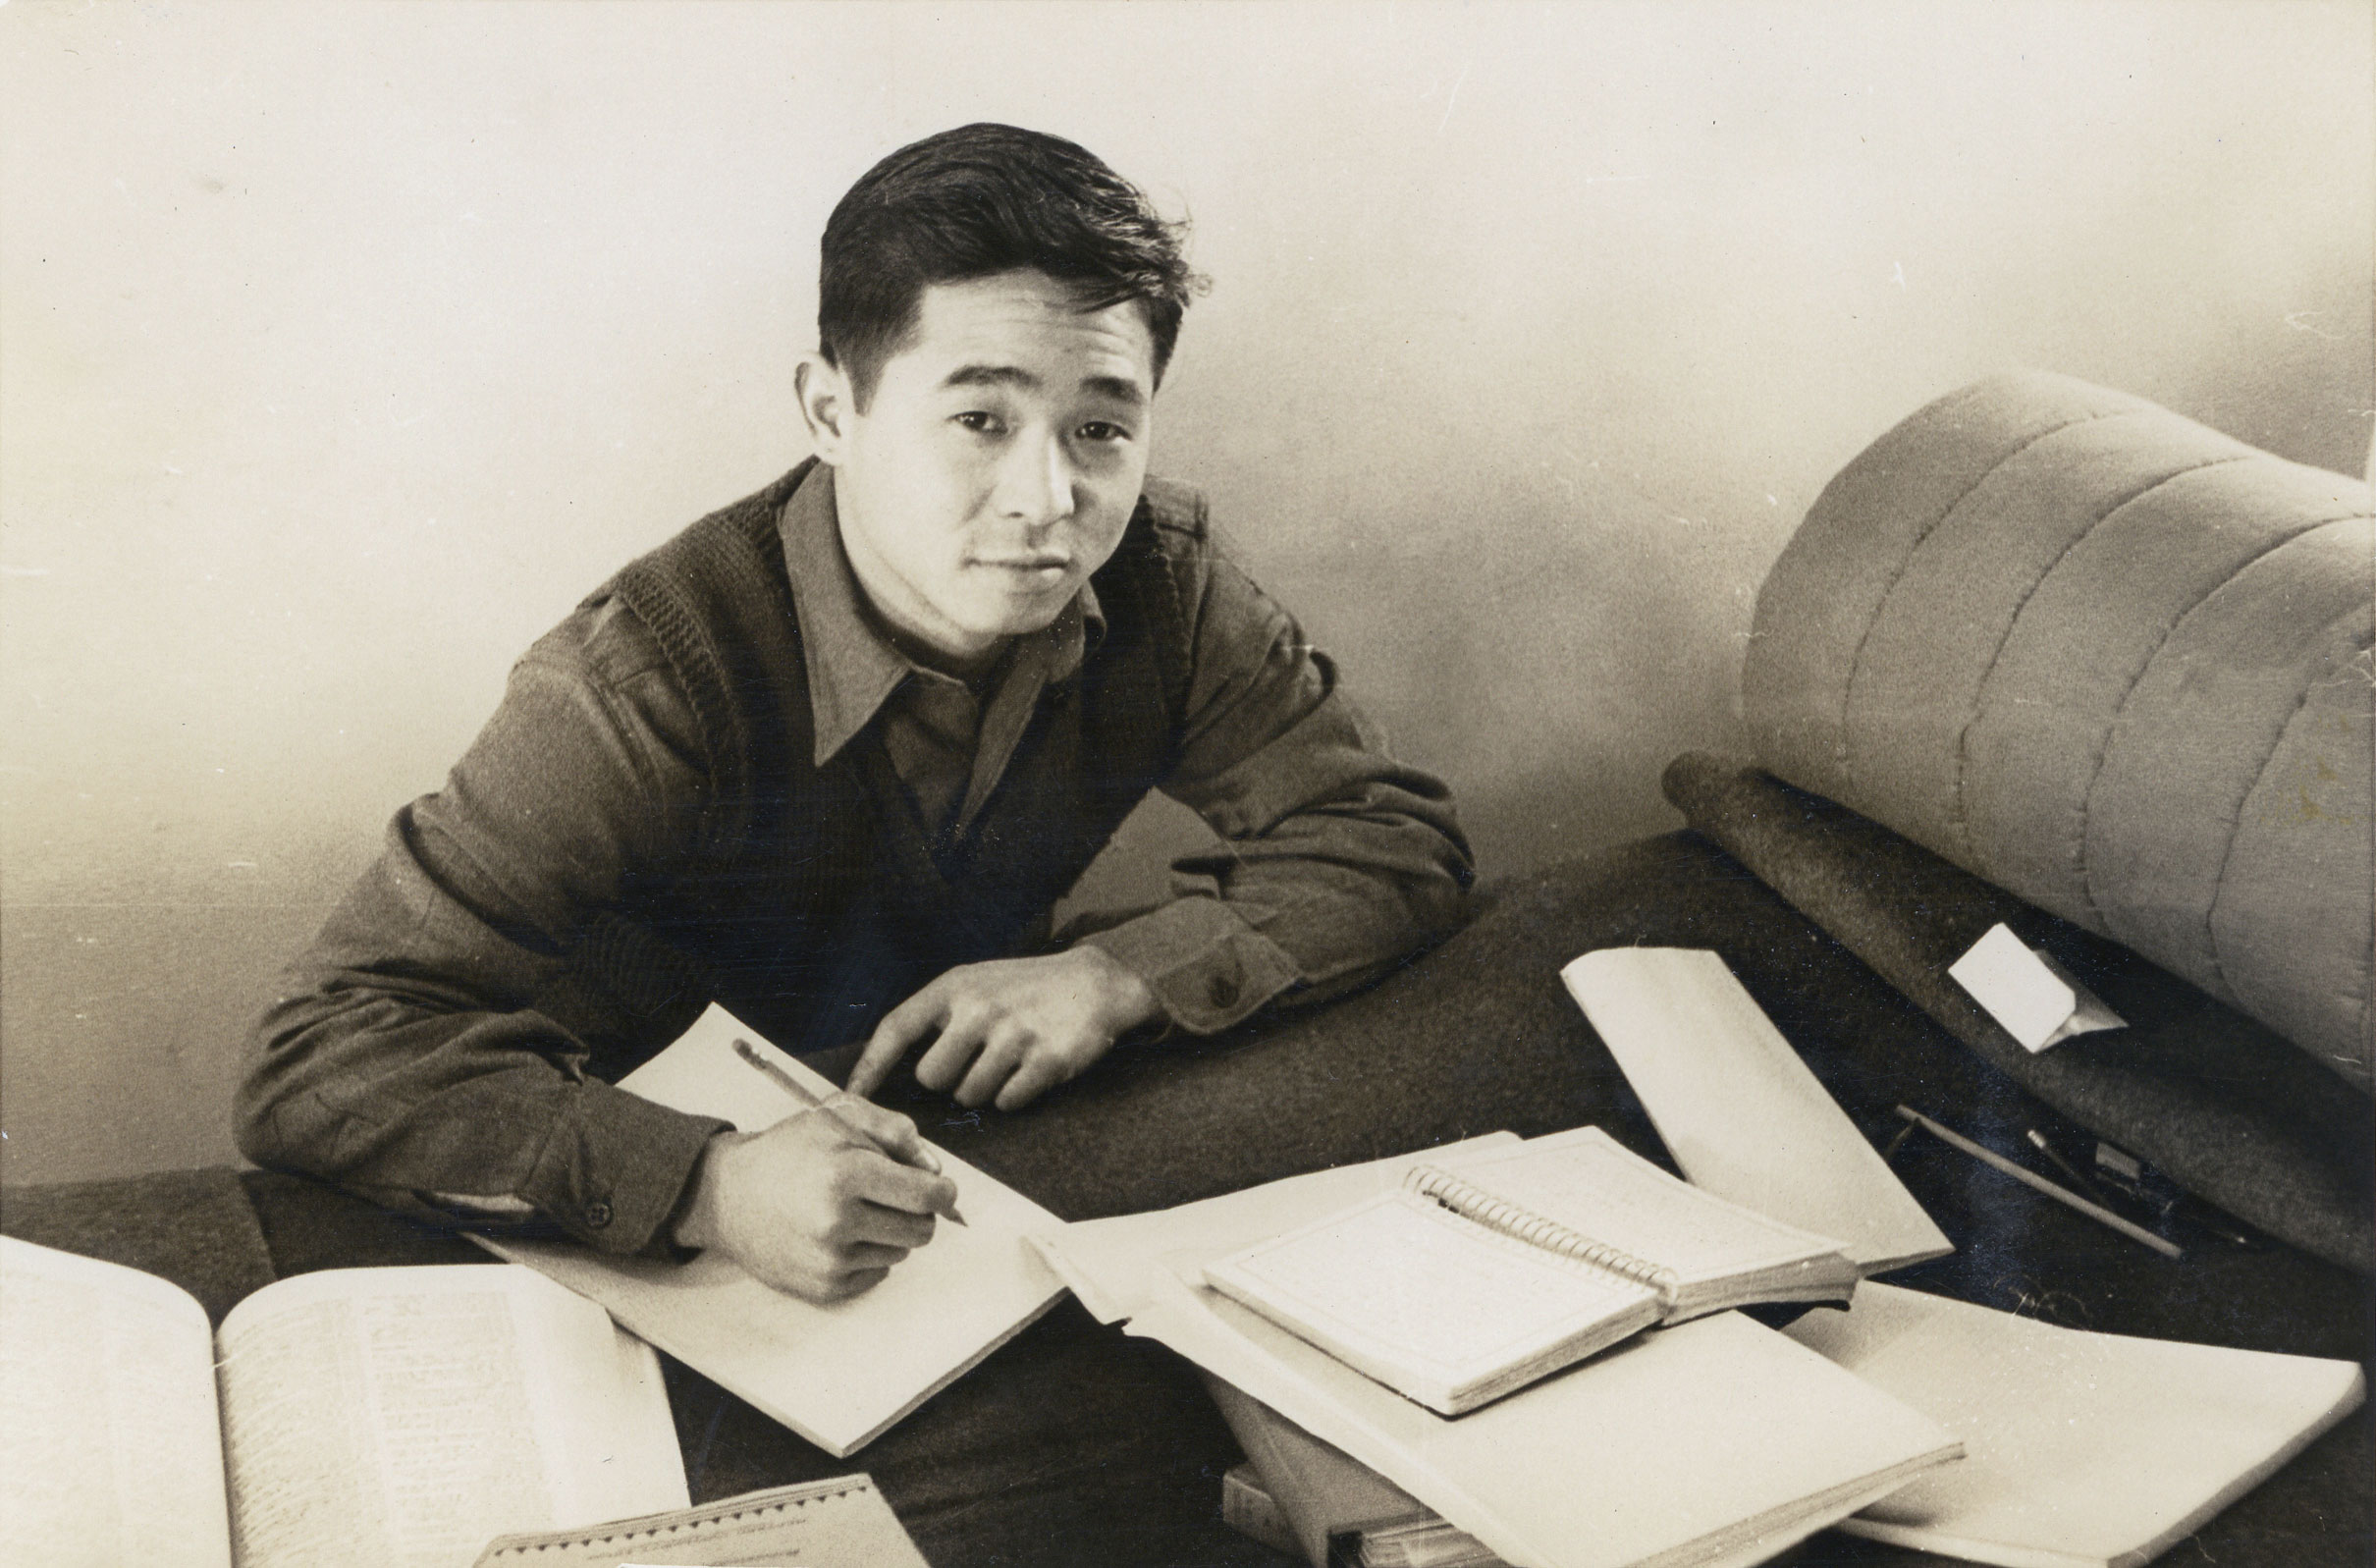 PROOF OF LOYALTY: Kazuo Yamane and the Nisei Soldiers of Hawaiʻi